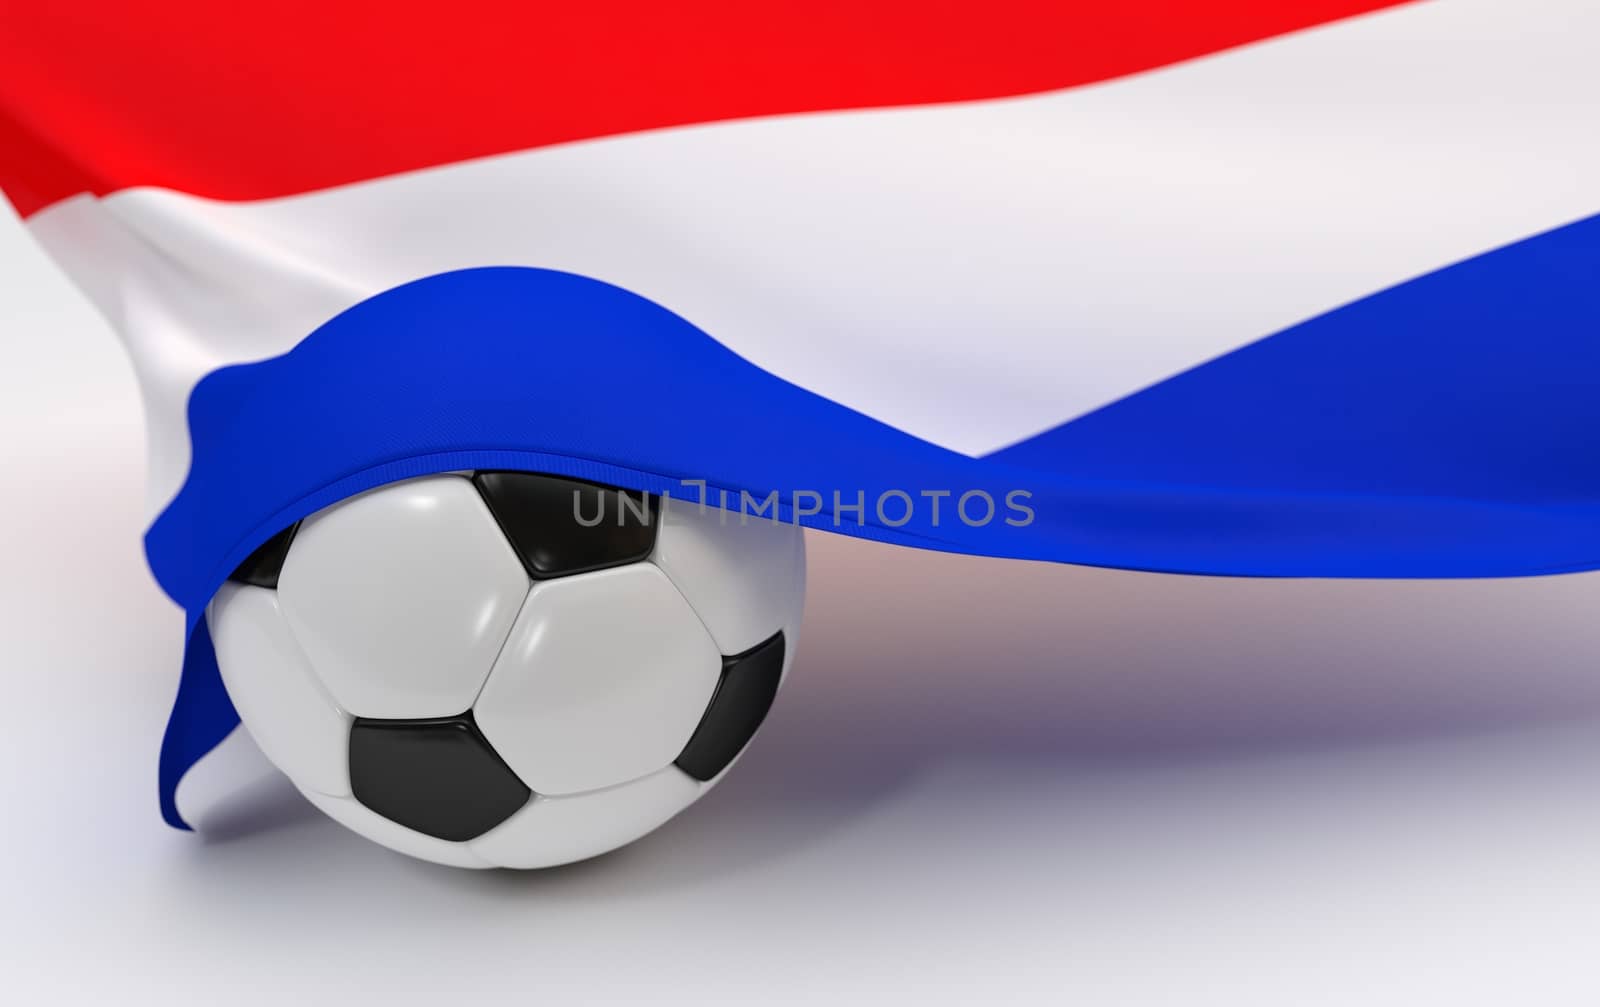 Netherlands flag with championship soccer ball by Barbraford